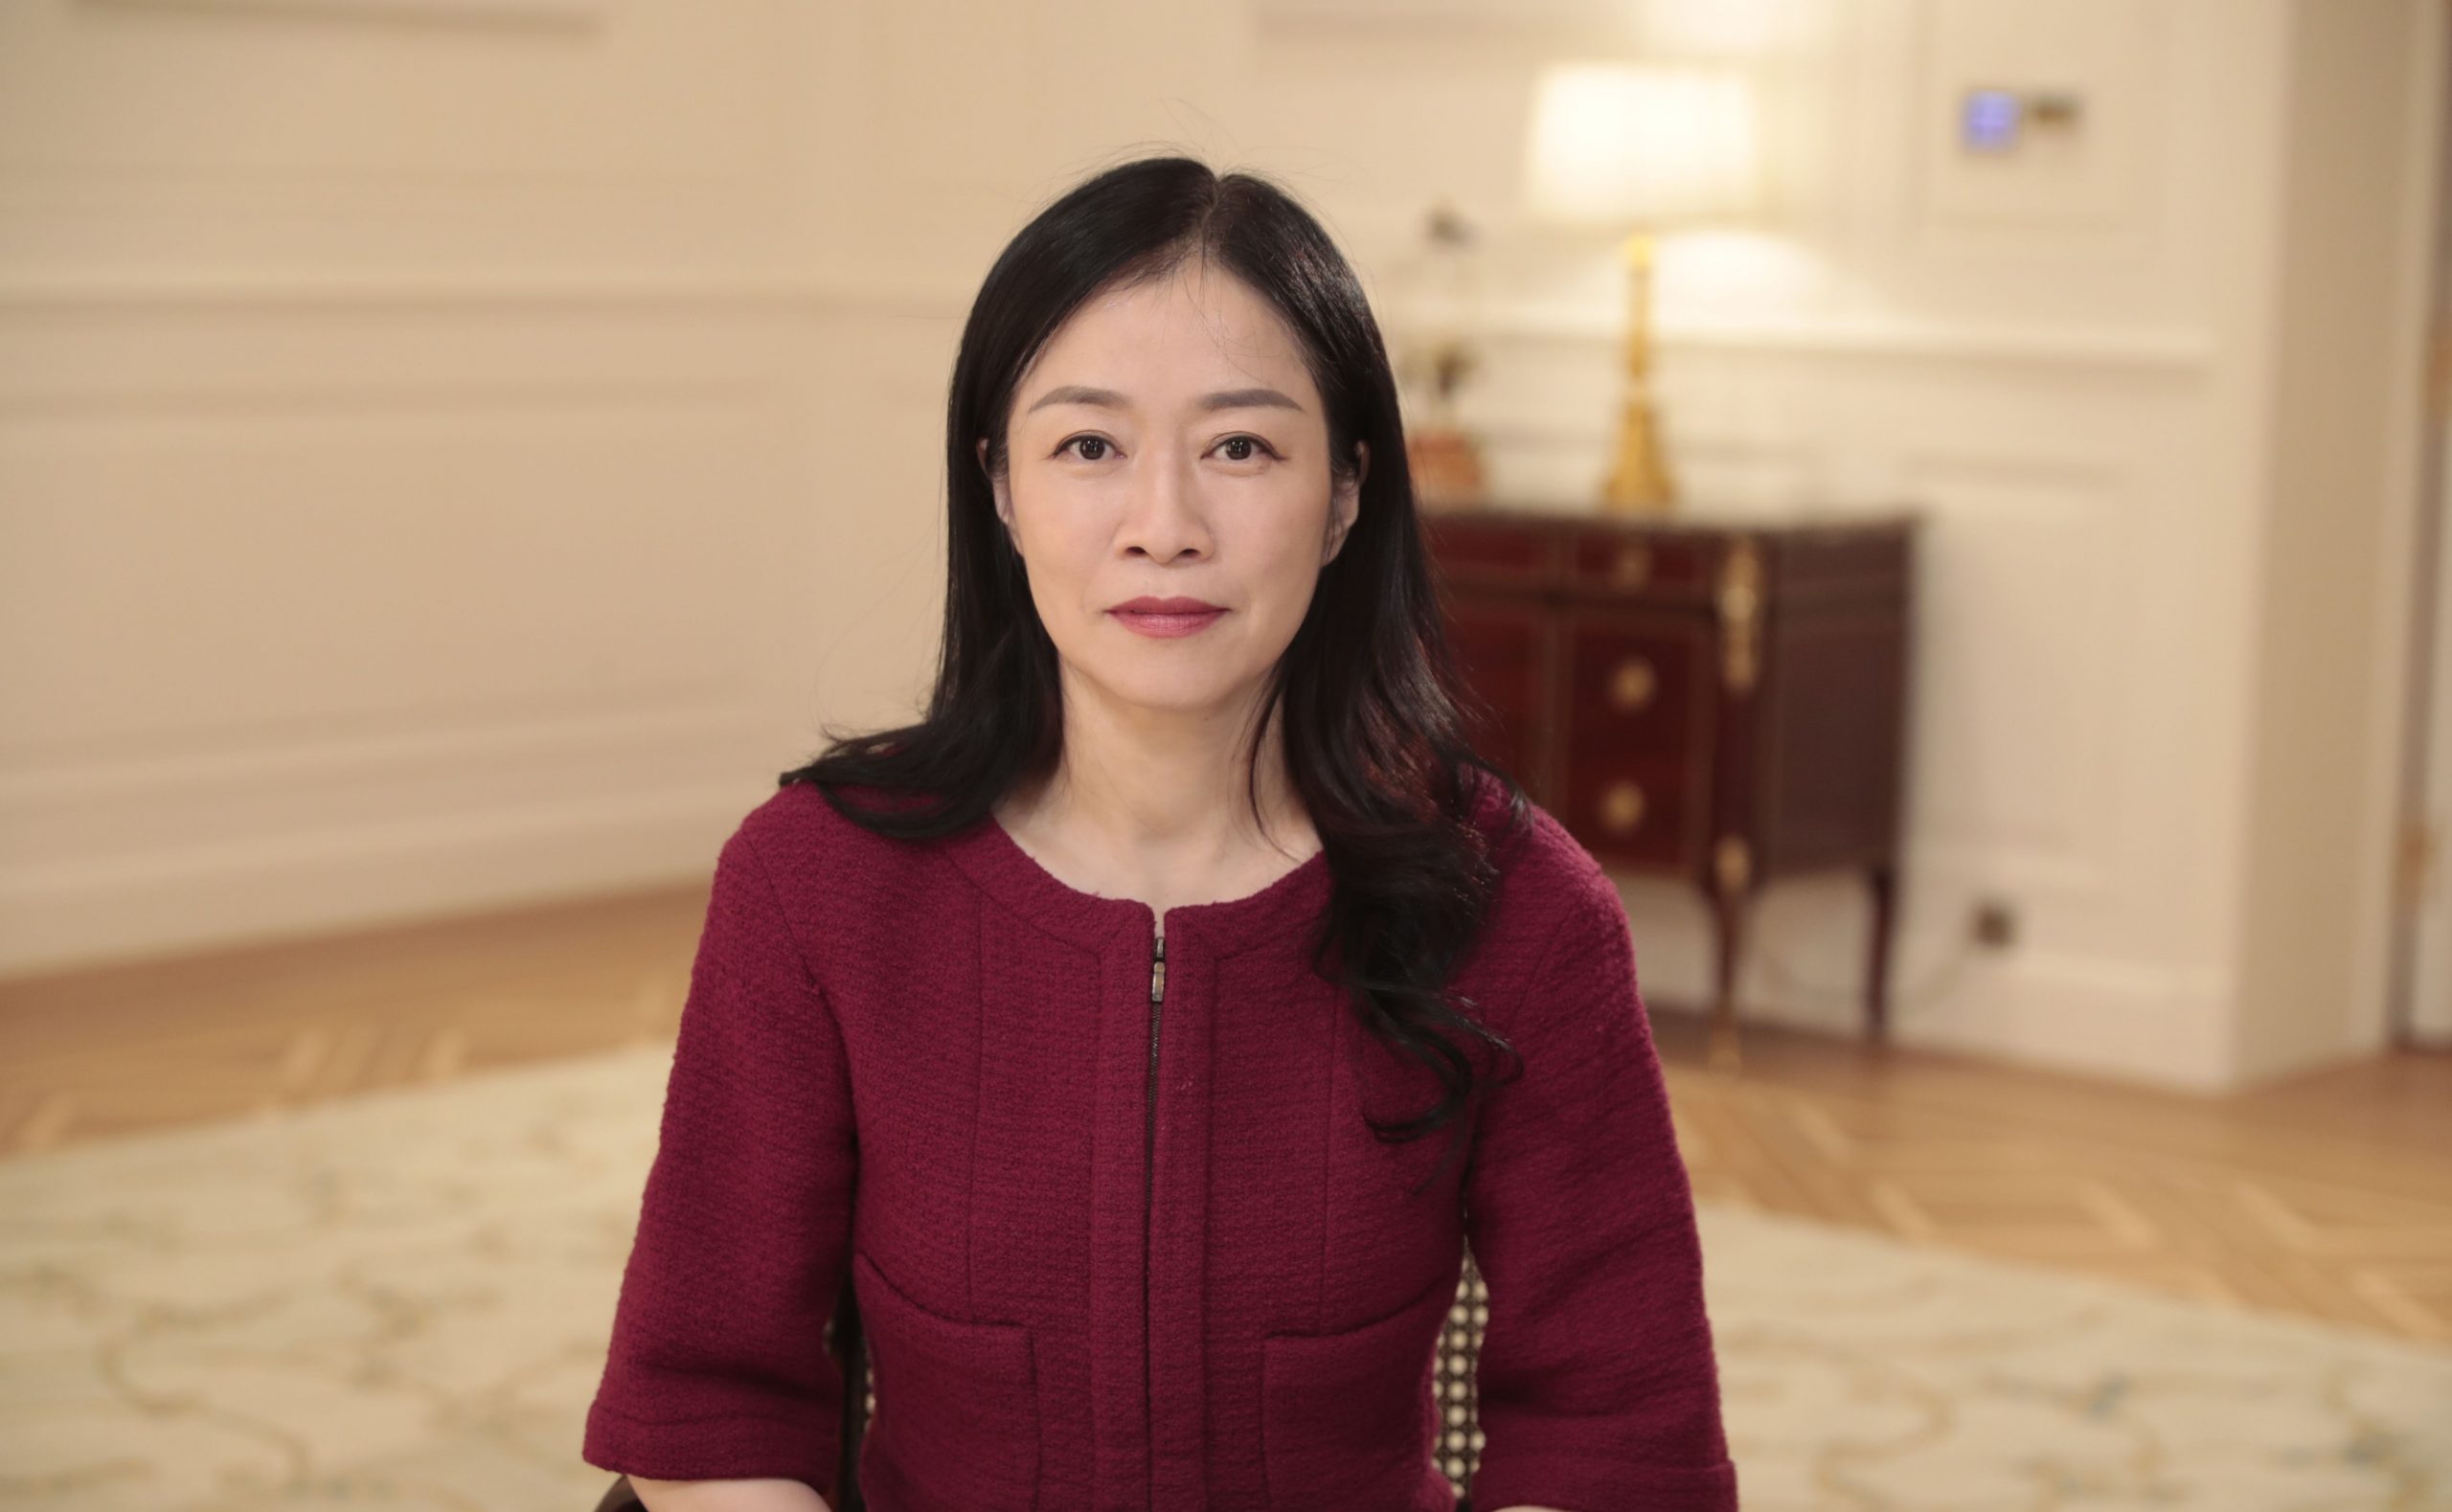 Humanity must agree on the benefits of technology – and then use it to uplift each other and achieve our development goals, says Huawei vice-president Catherine Chen.